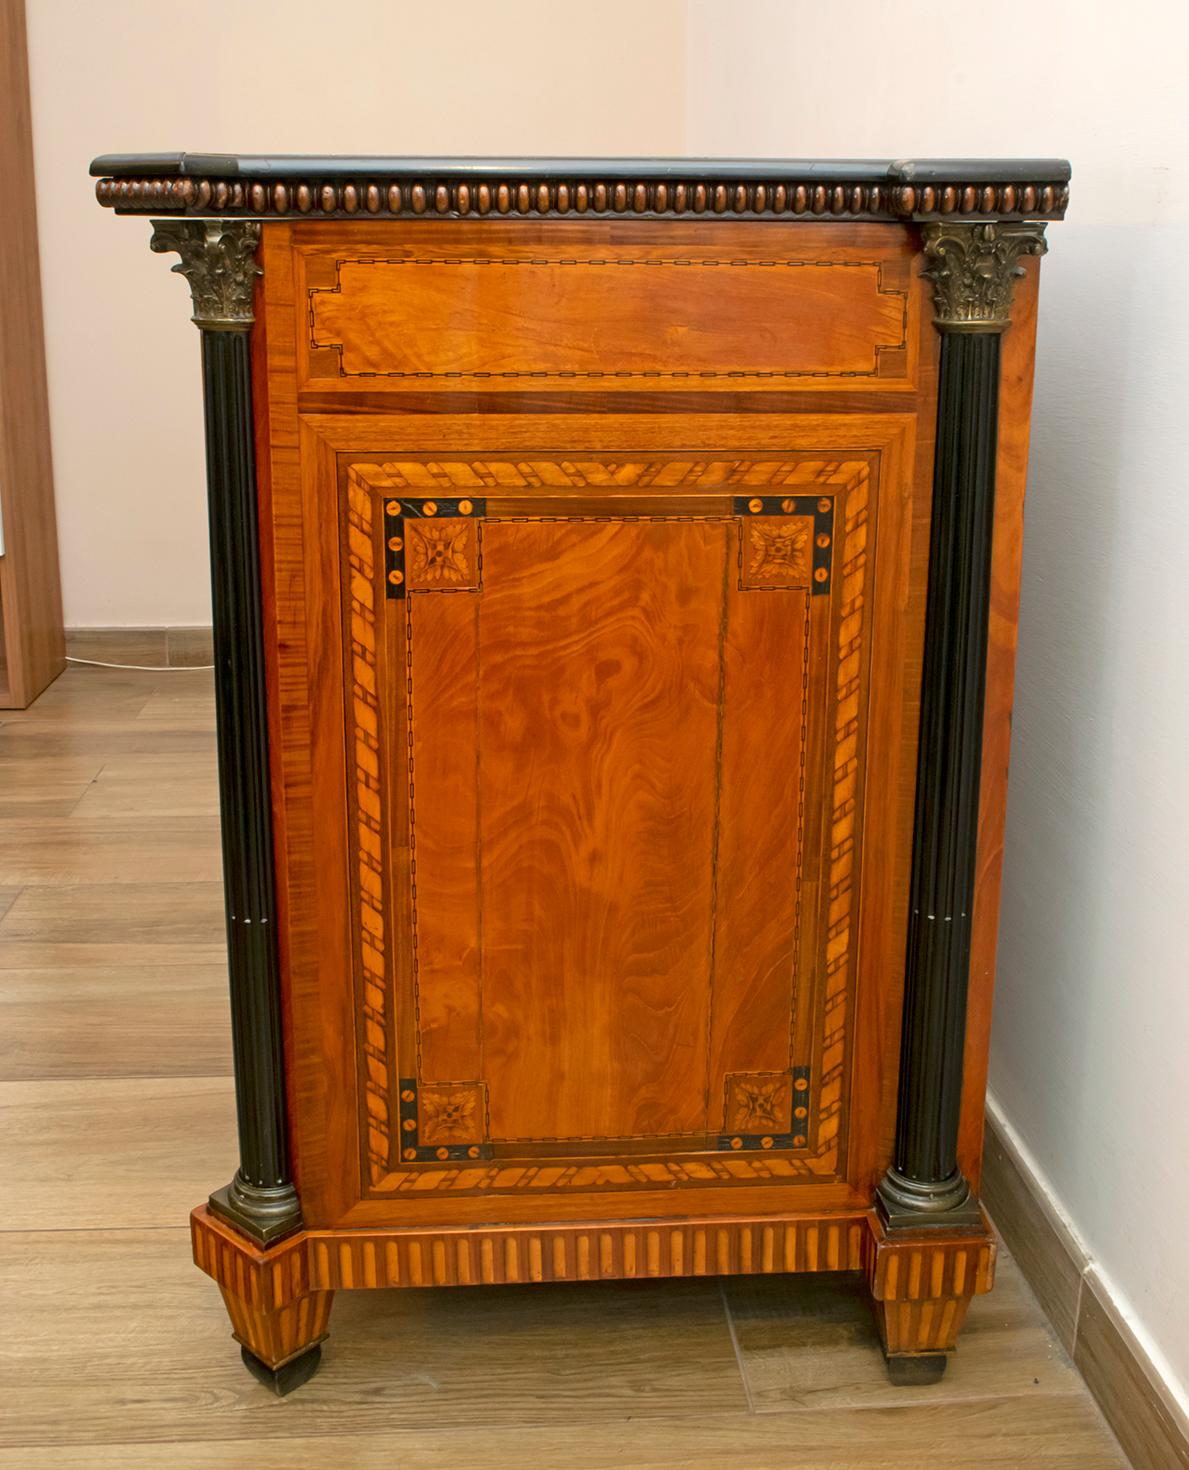 Napoleon III French Sideboard Inlaid with Geometric Floral Motifs, 1850 For Sale 3